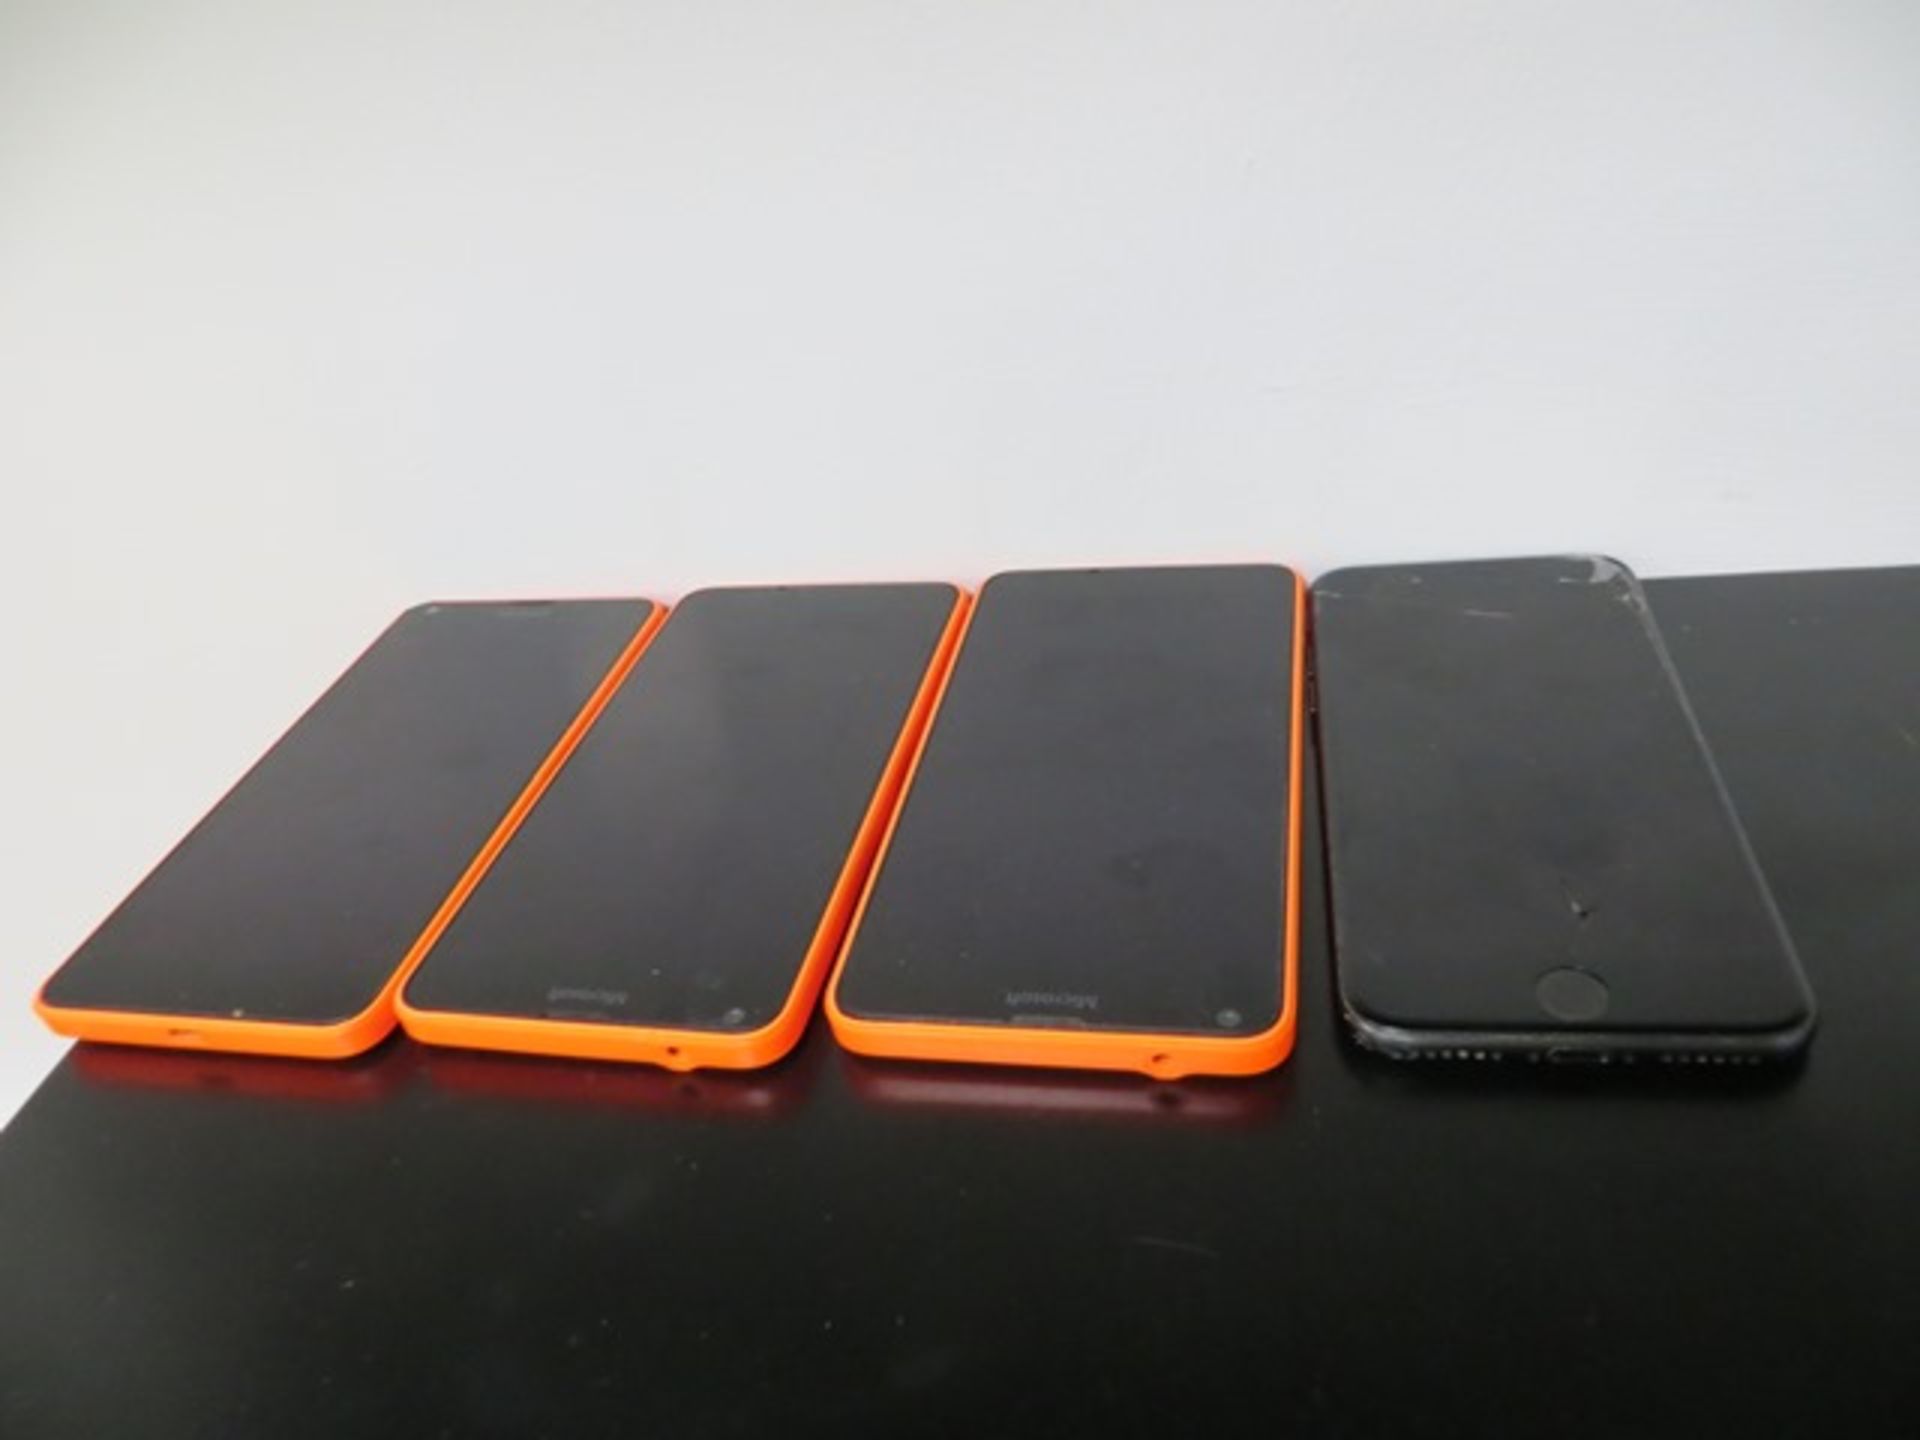 Three Microsoft Phones and an Apple iPhone (Cracked Screen)* This lot is located at Unit 15,